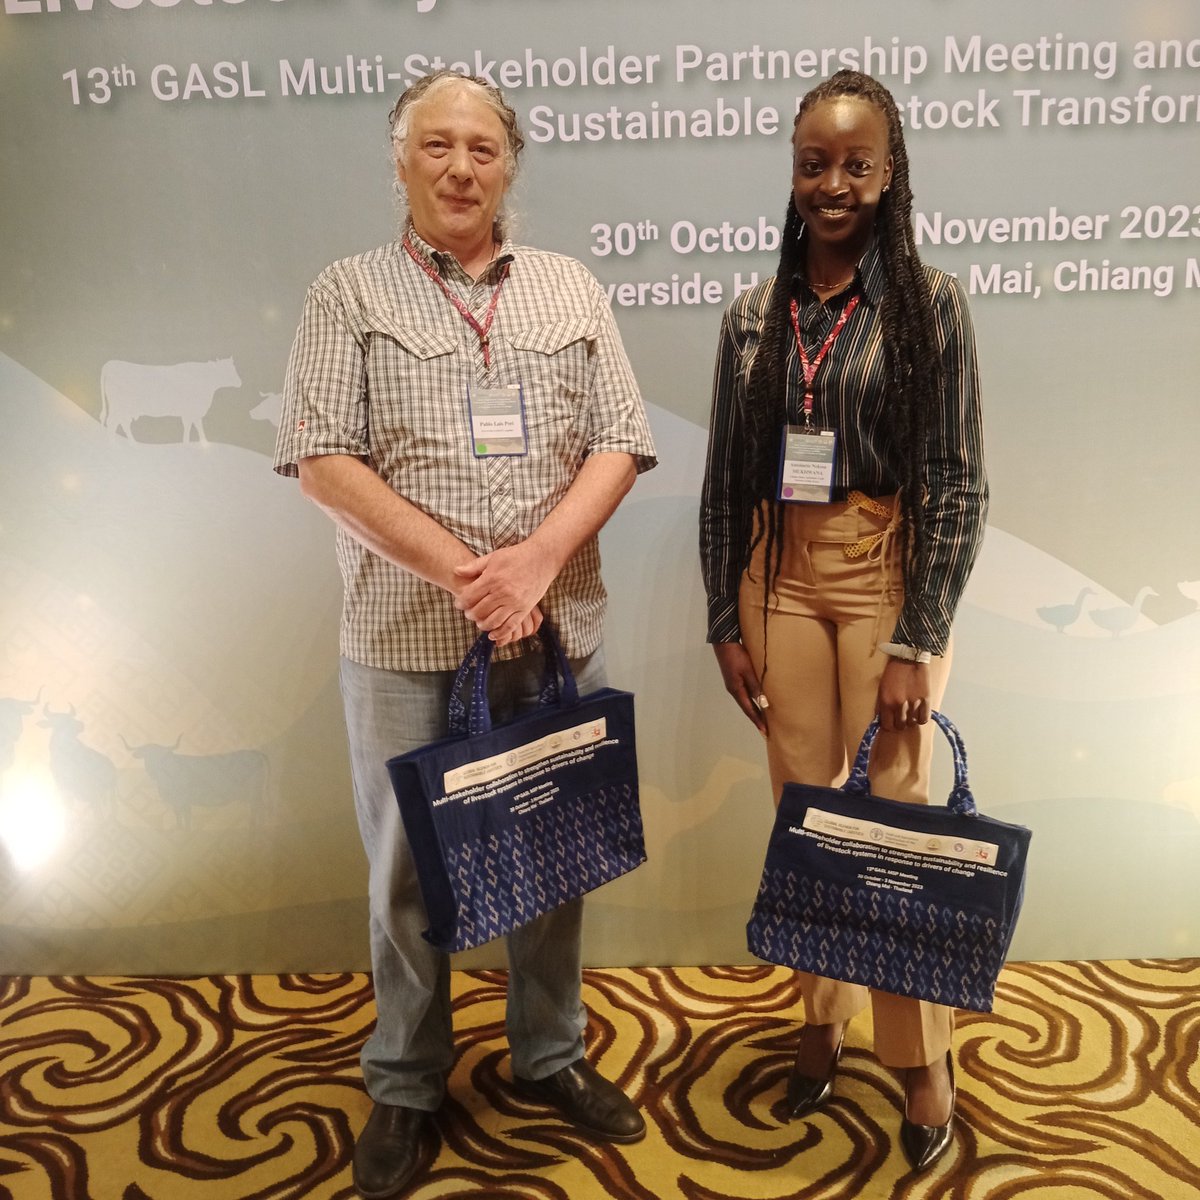 As a Youth Advisory Member Representing Kenya in the 13th Global Agenda For Sustainable Livestock (GASL)Multi-Stakeholder Partnership Meeting and Regional Conference on Sustainable Livestock Transformation in Chang Mai , Thailand #Sustainablelivestock